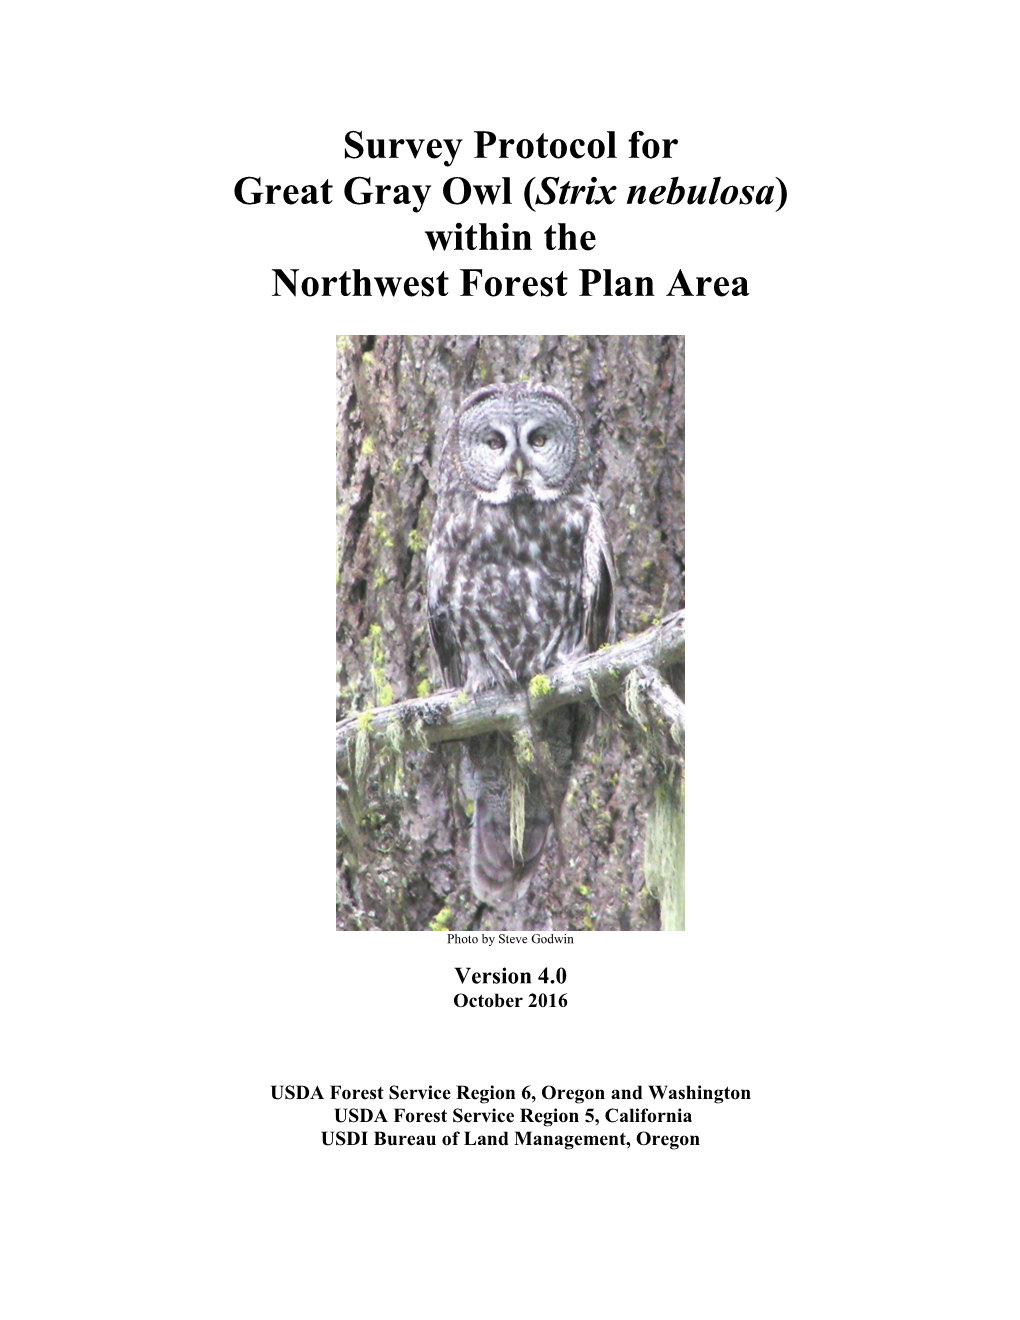 Survey Protocol for Great Gray Owl (Strix Nebulosa) Within the Northwest Forest Plan Area